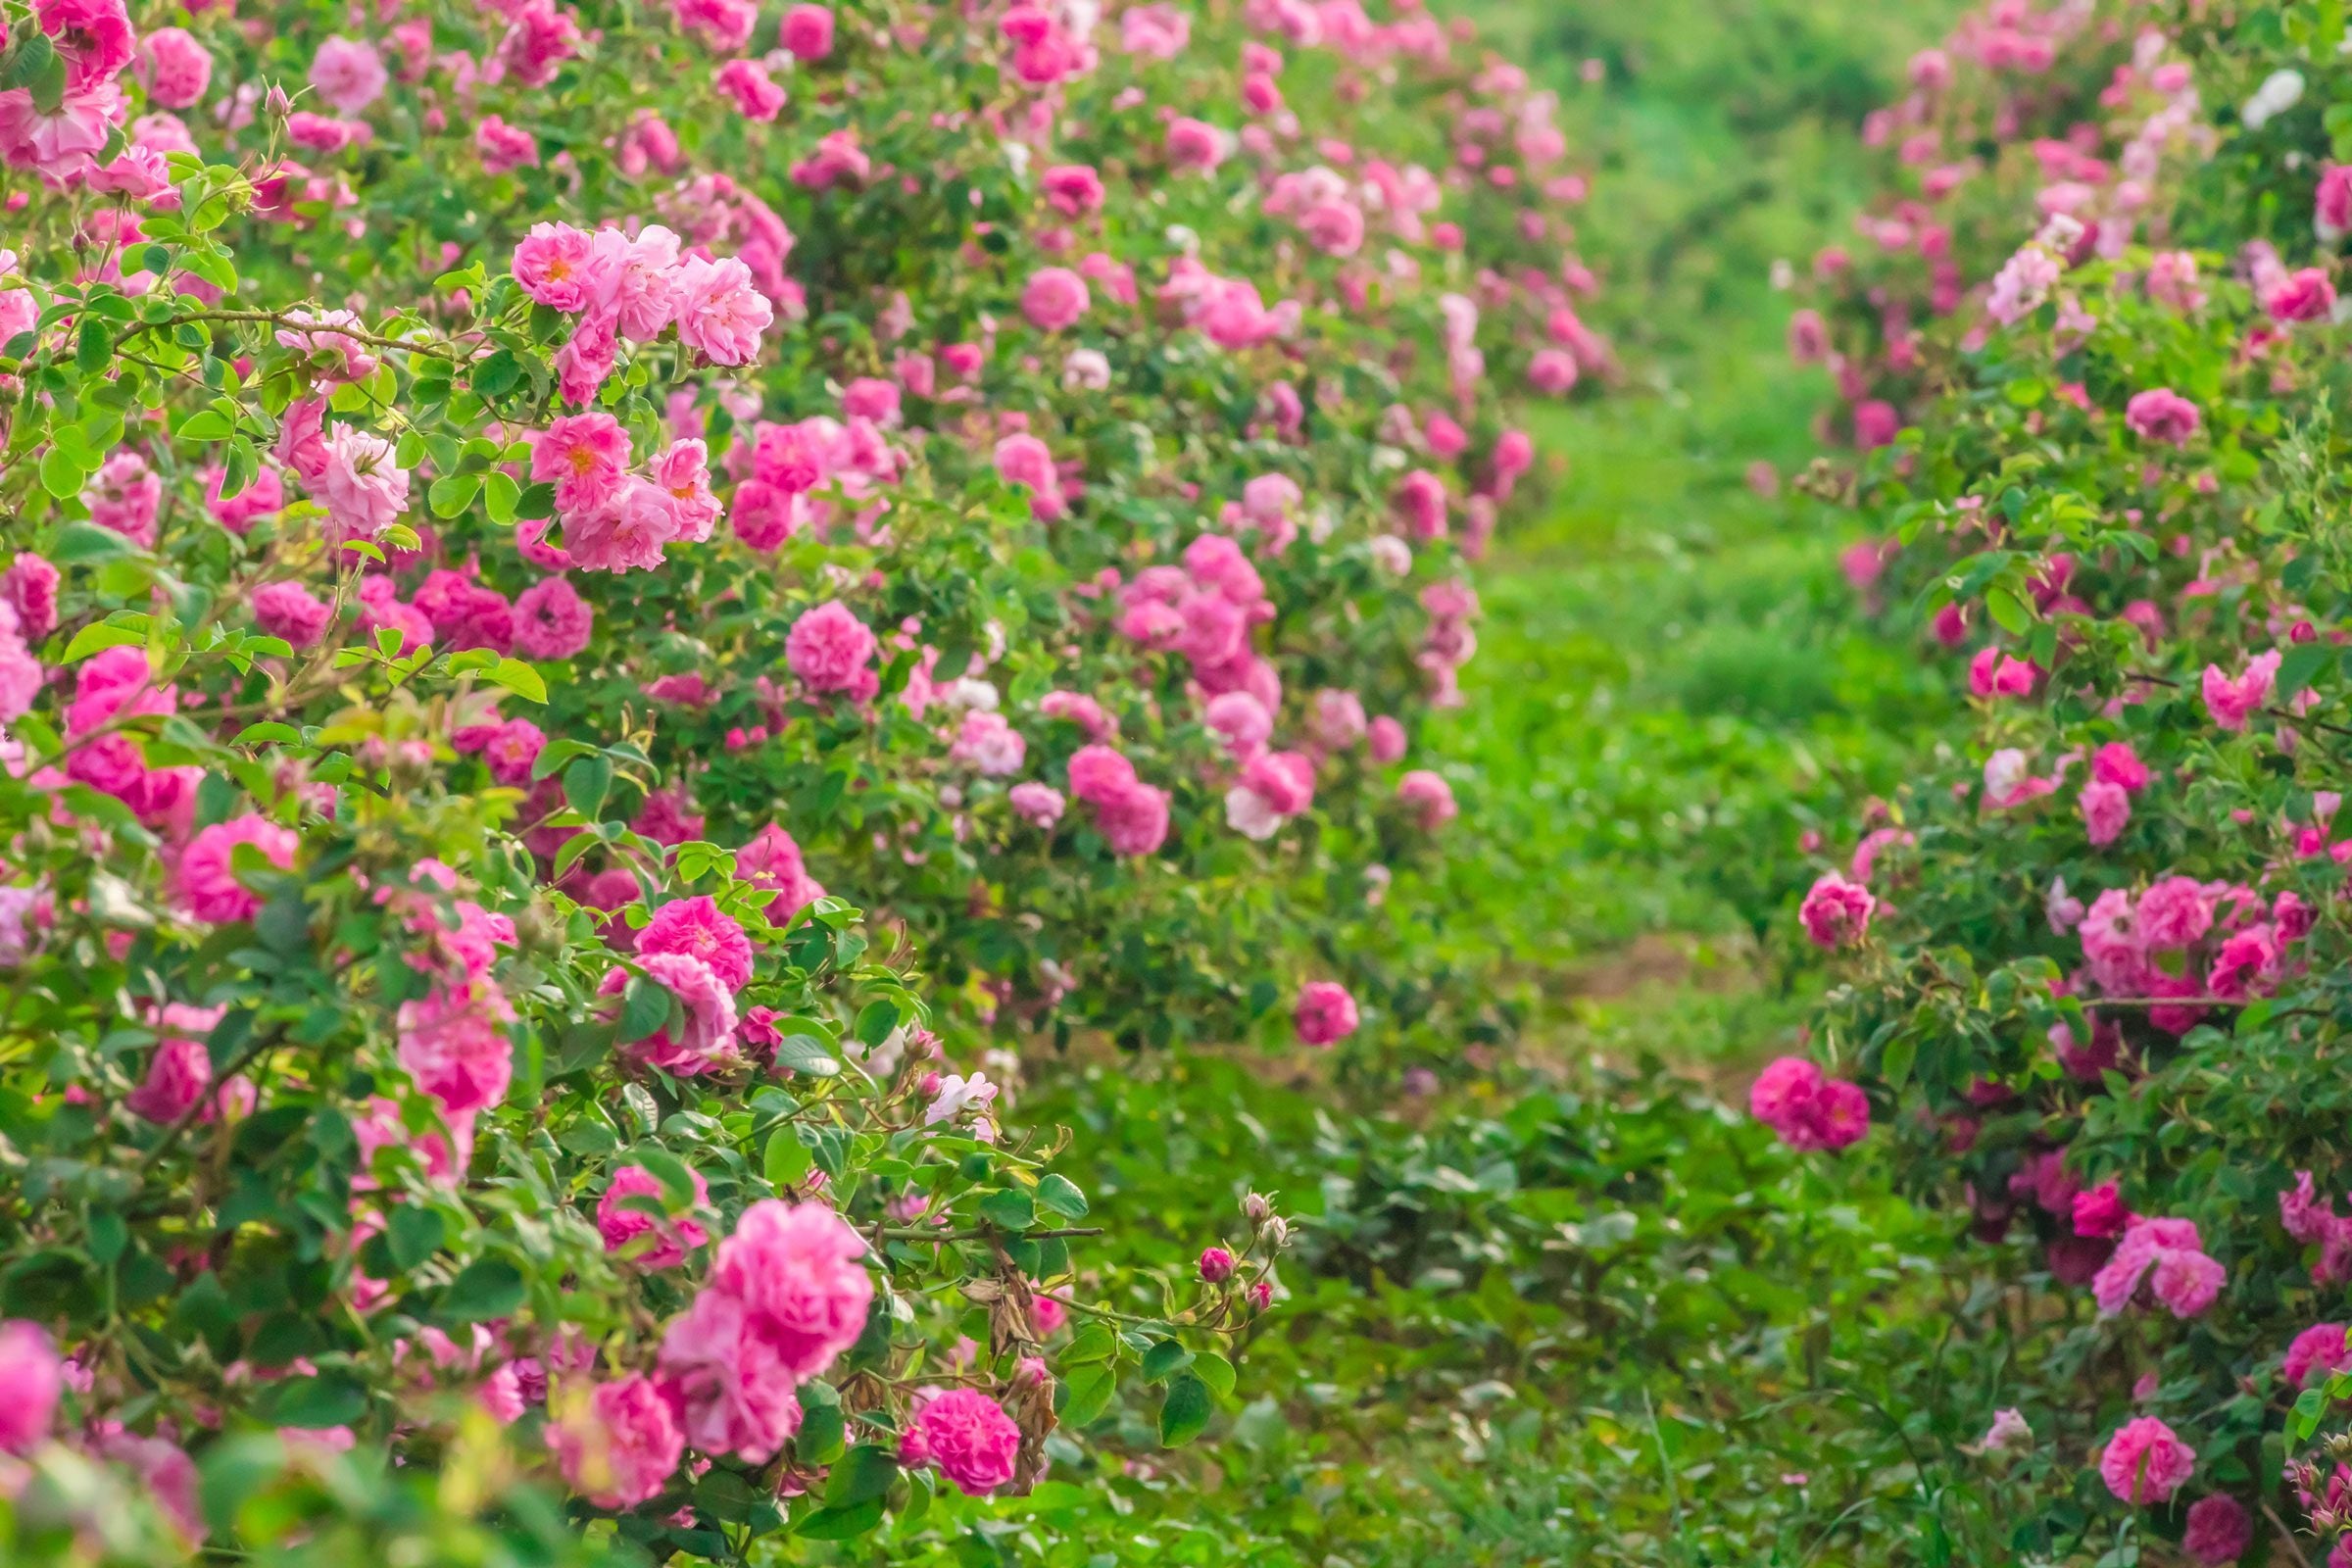 Pink roses growing in a field.